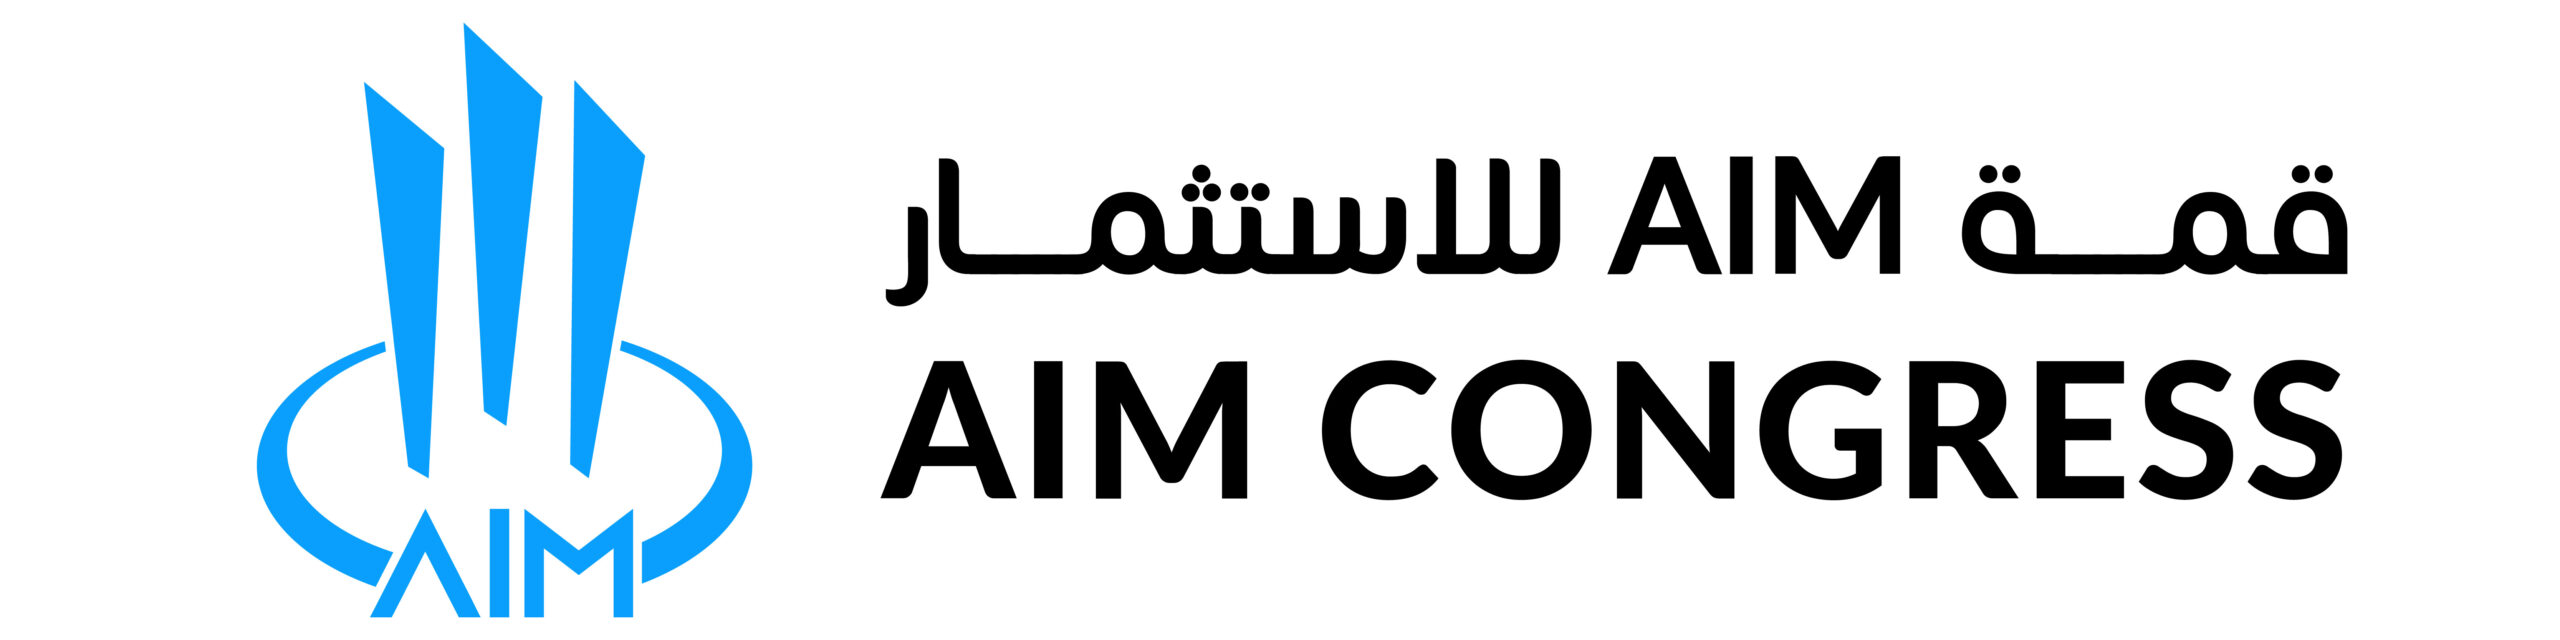 AIM Startup Workshop to Prepare Participants for 2024 AIM Congress in Abu Dhabi